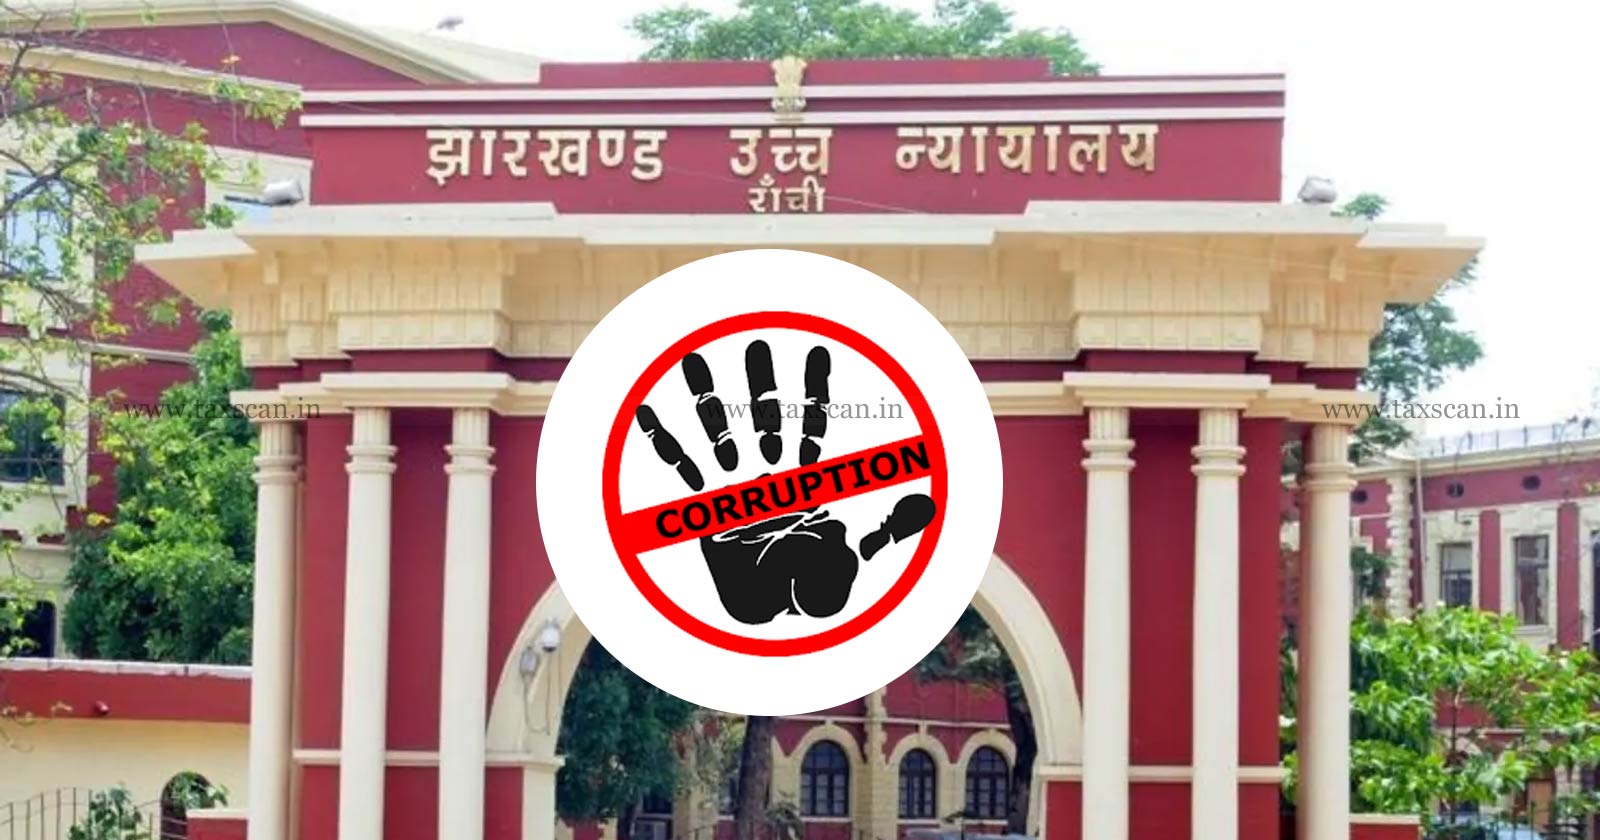 Corruption Case - Jharkhand High Court - Anticipatory Bail - Chartered Accountants - Surrender - Renew Anticipatory Bail - taxscan